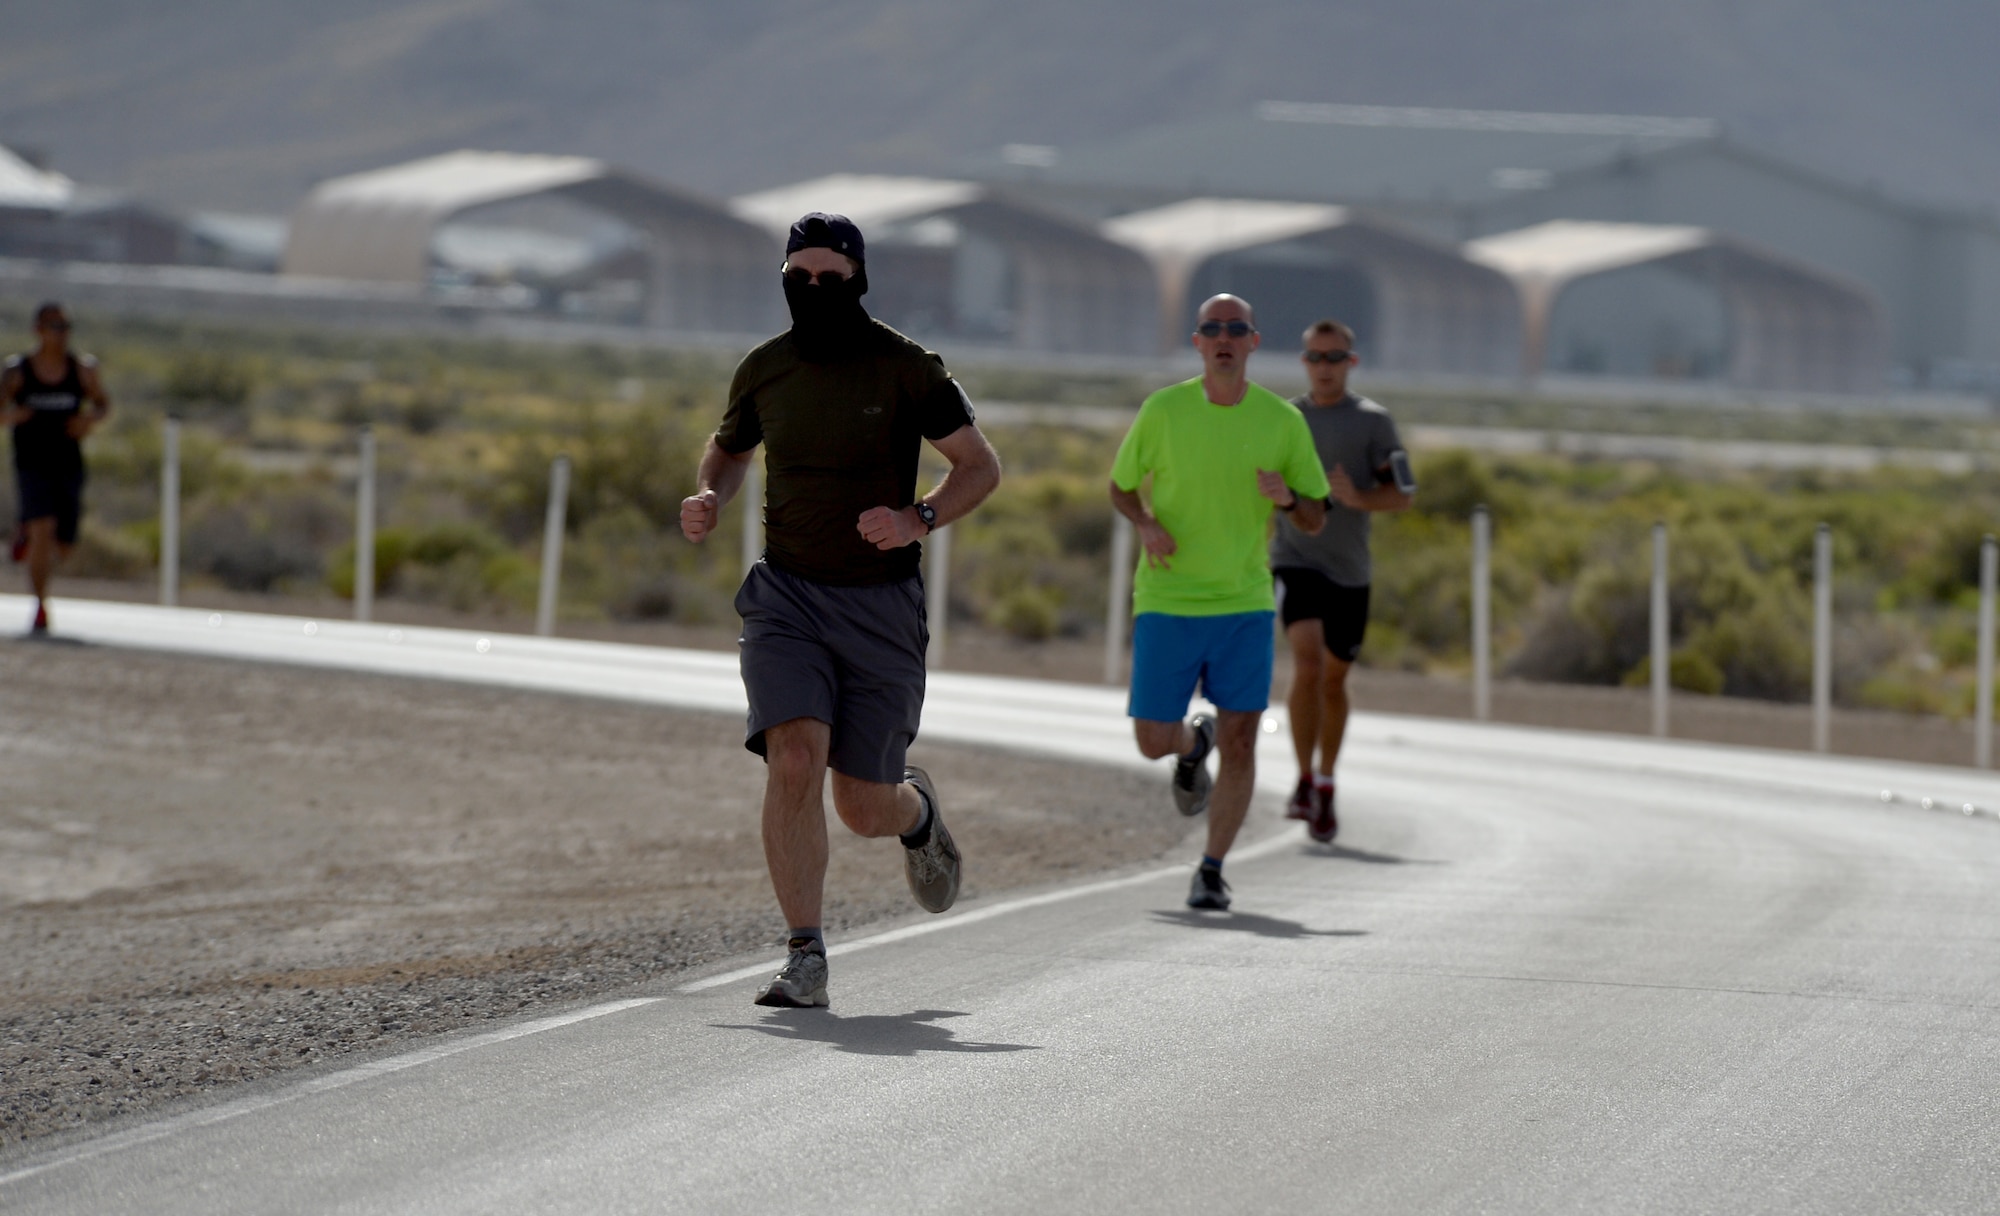 Members of the 432nd Wing/432nd Air Expeditionary Wing at Creech Air Force Base, Nevada, participate in a 5k and 10 k run June 10, 2016. To help promote physical readiness, obstacle courses, races and unit workout sessions are organized on a regular basis at Creech. (U.S. Air Force photo by Airman 1st Class Kristan Campbell/Released).